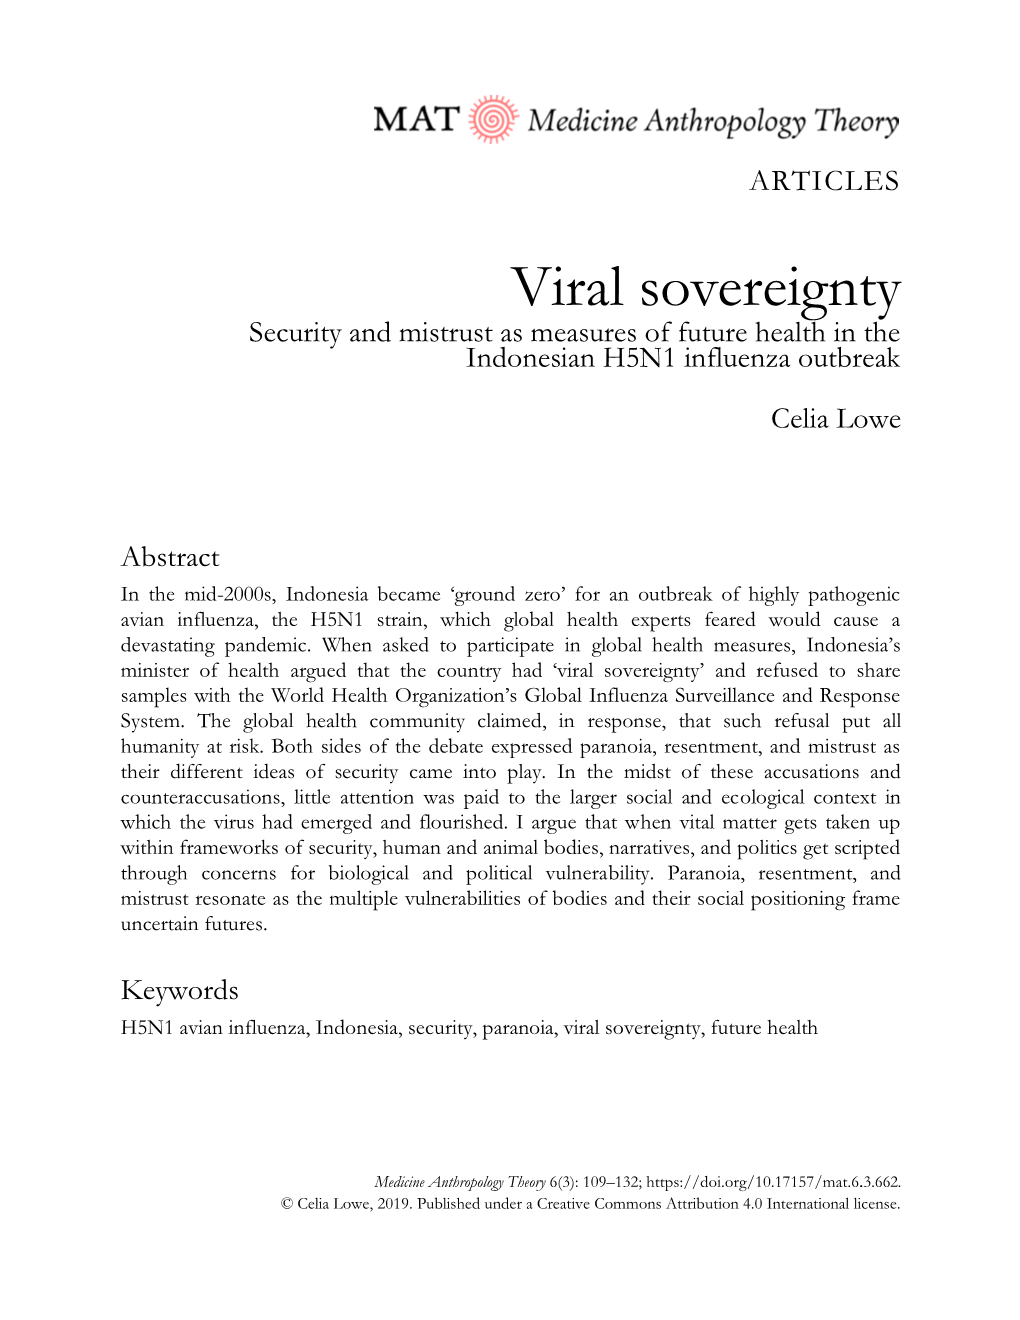 Viral Sovereignty Security and Mistrust As Measures of Future Health in the Indonesian H5N1 Influenza Outbreak